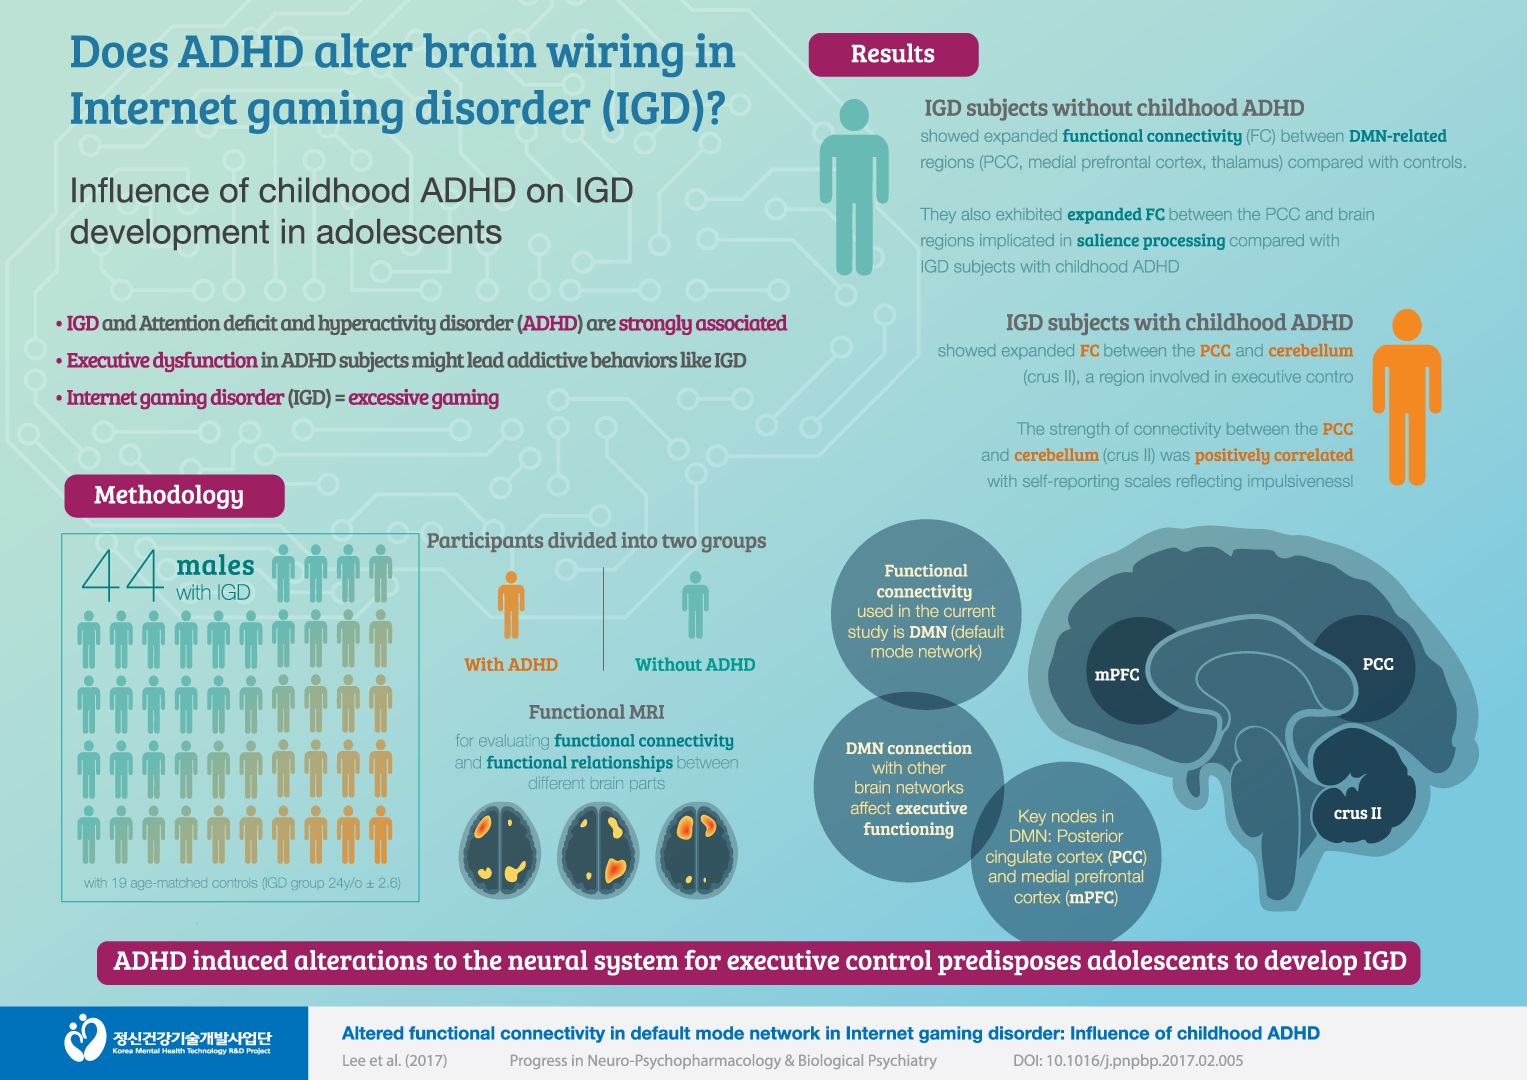 8. Does ADHD alter brain wiring in Internet Gamiing Disorder(IGD)?